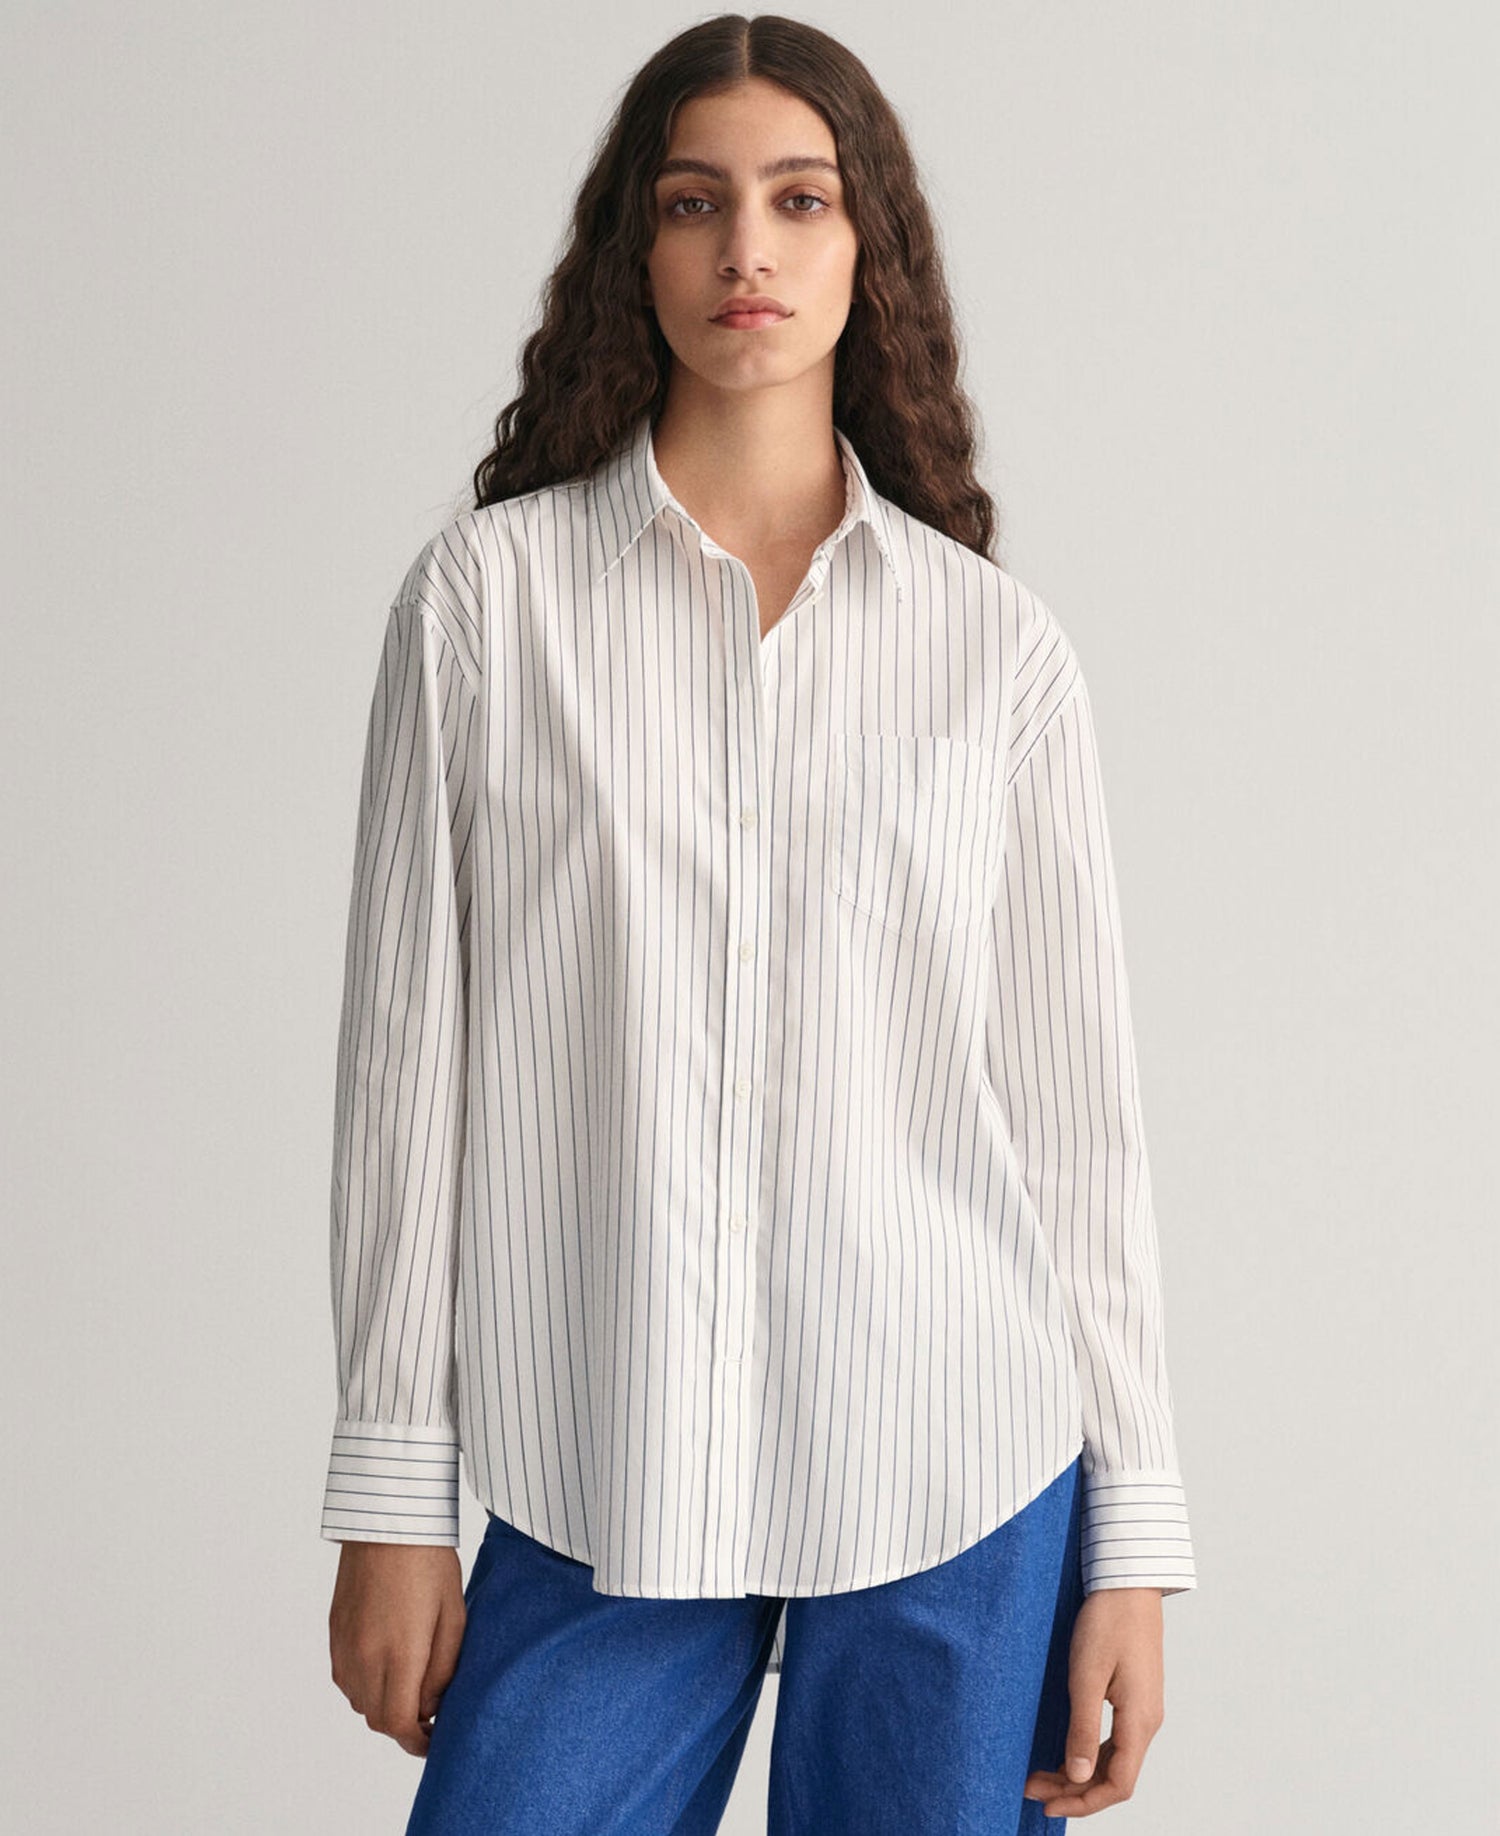 Relaxed Fit Striped Poplin Shirt - White